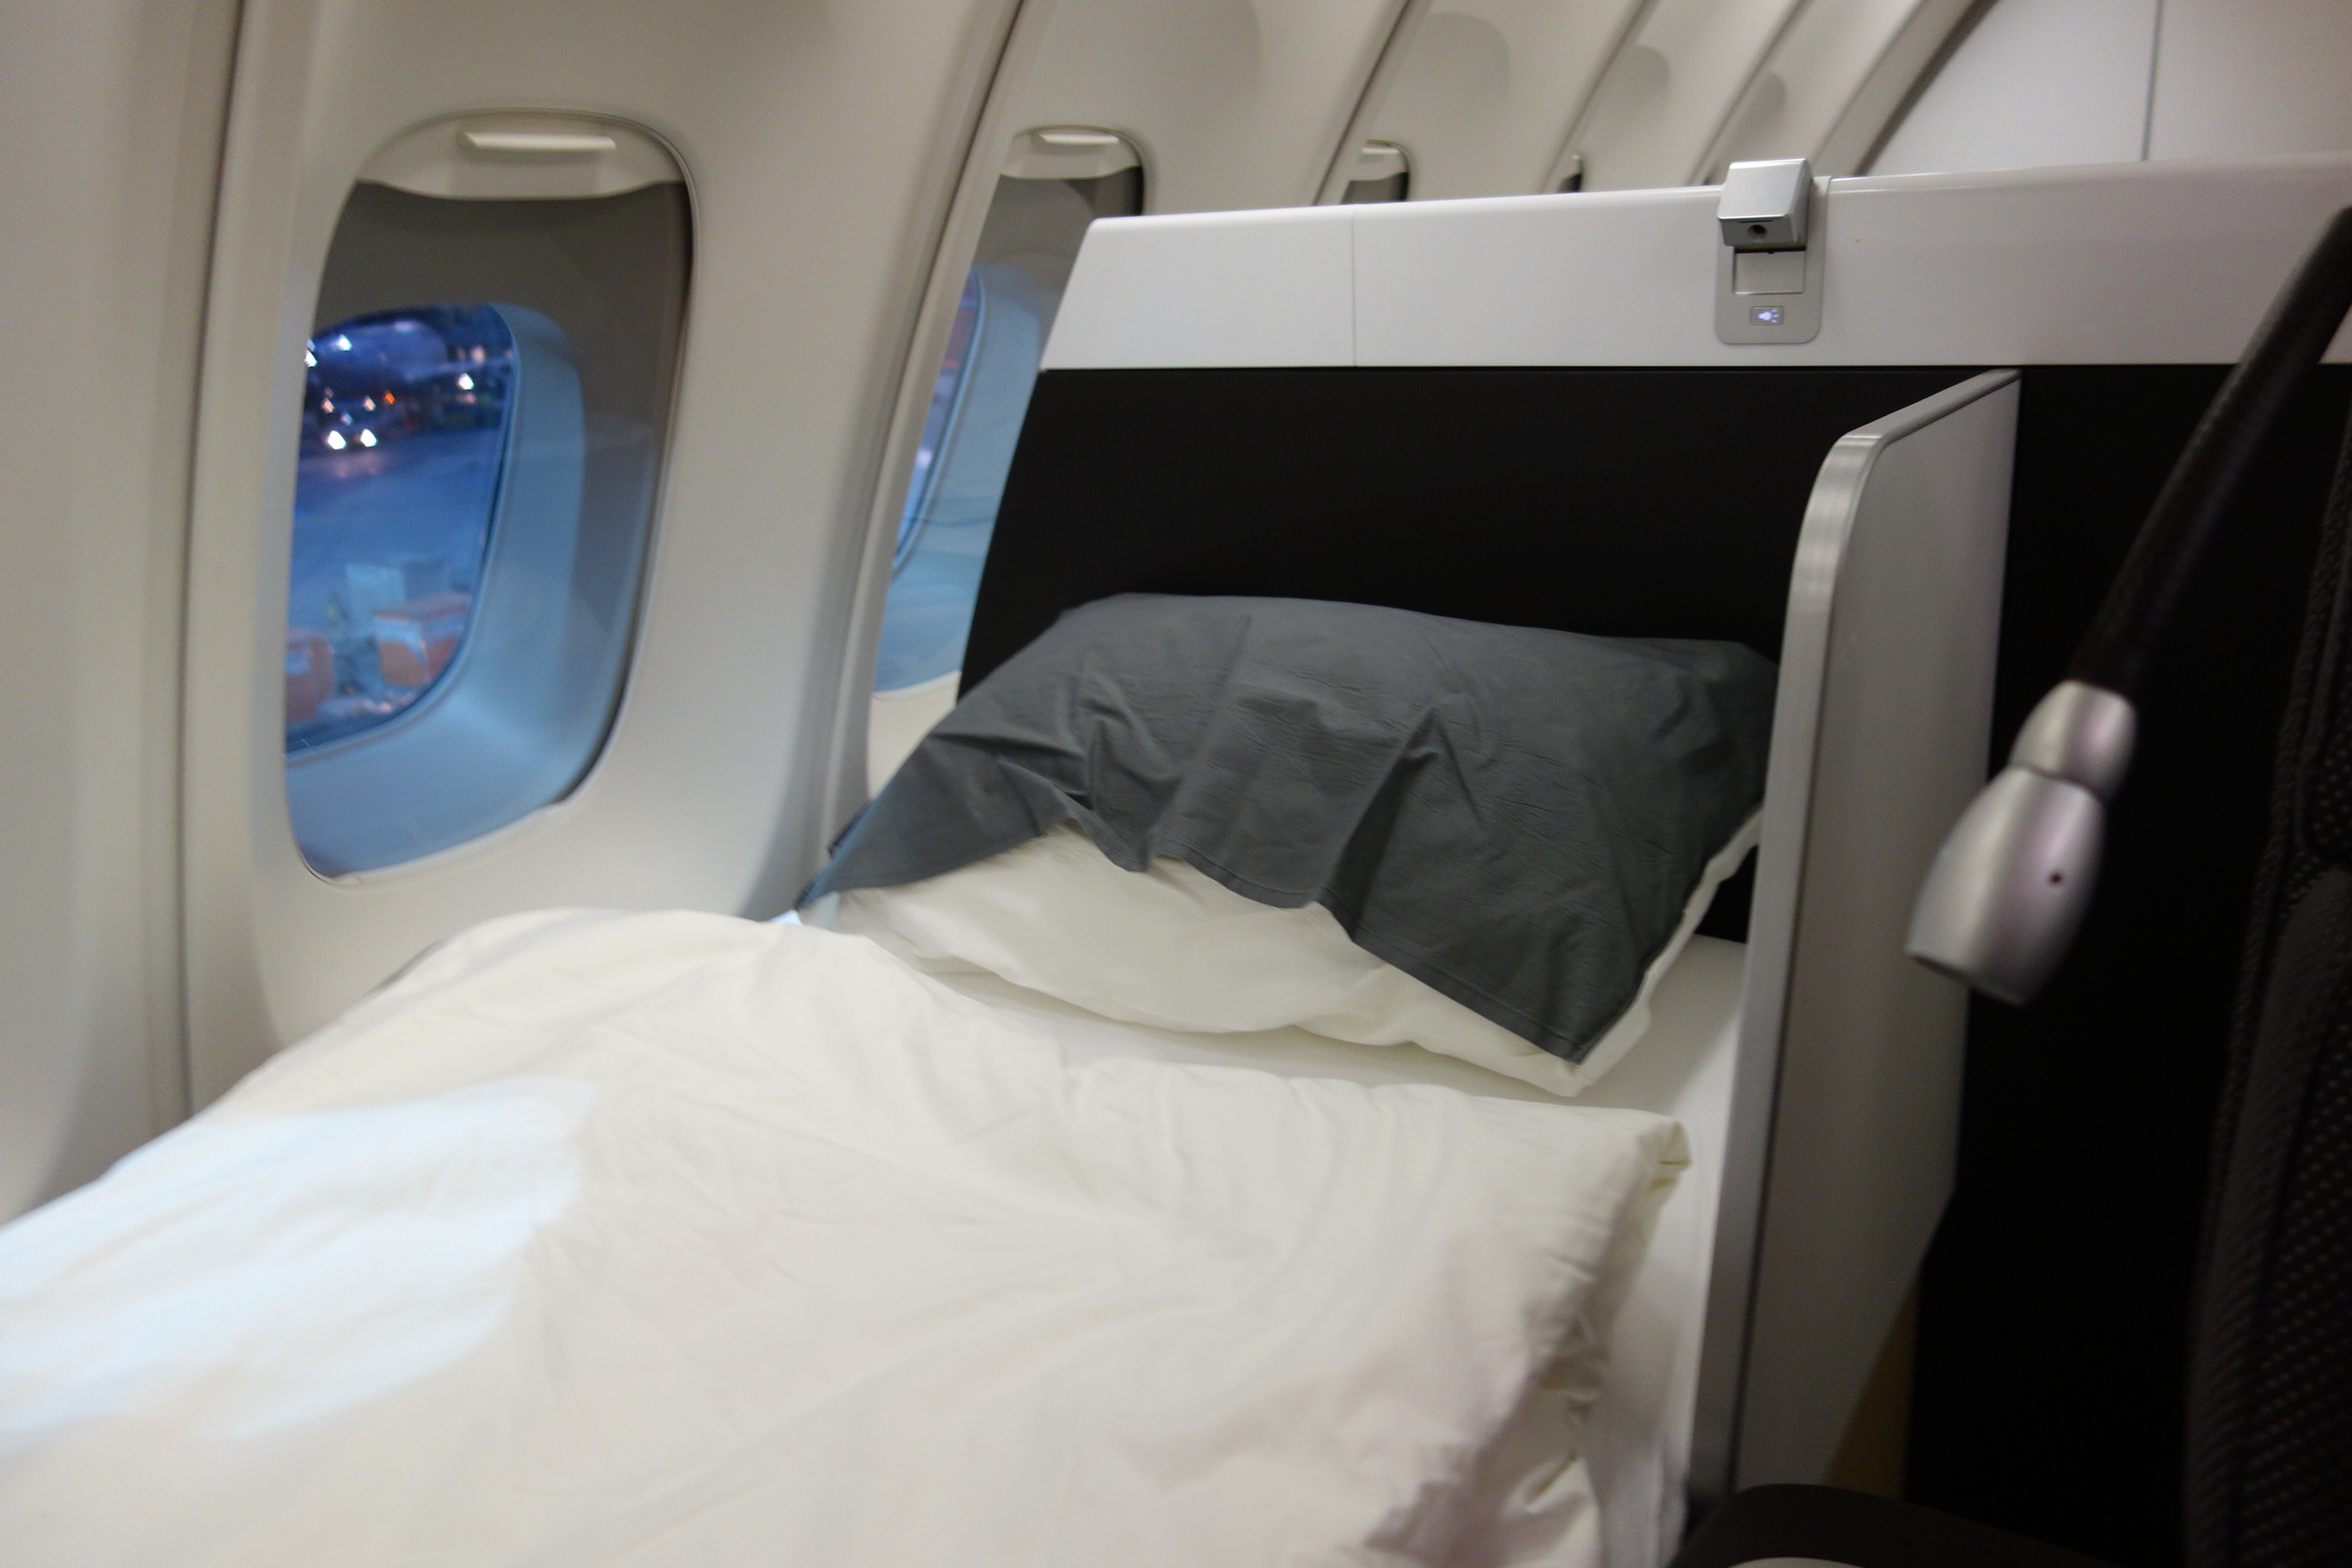 The most comfortable bed I've slept in on an airplane